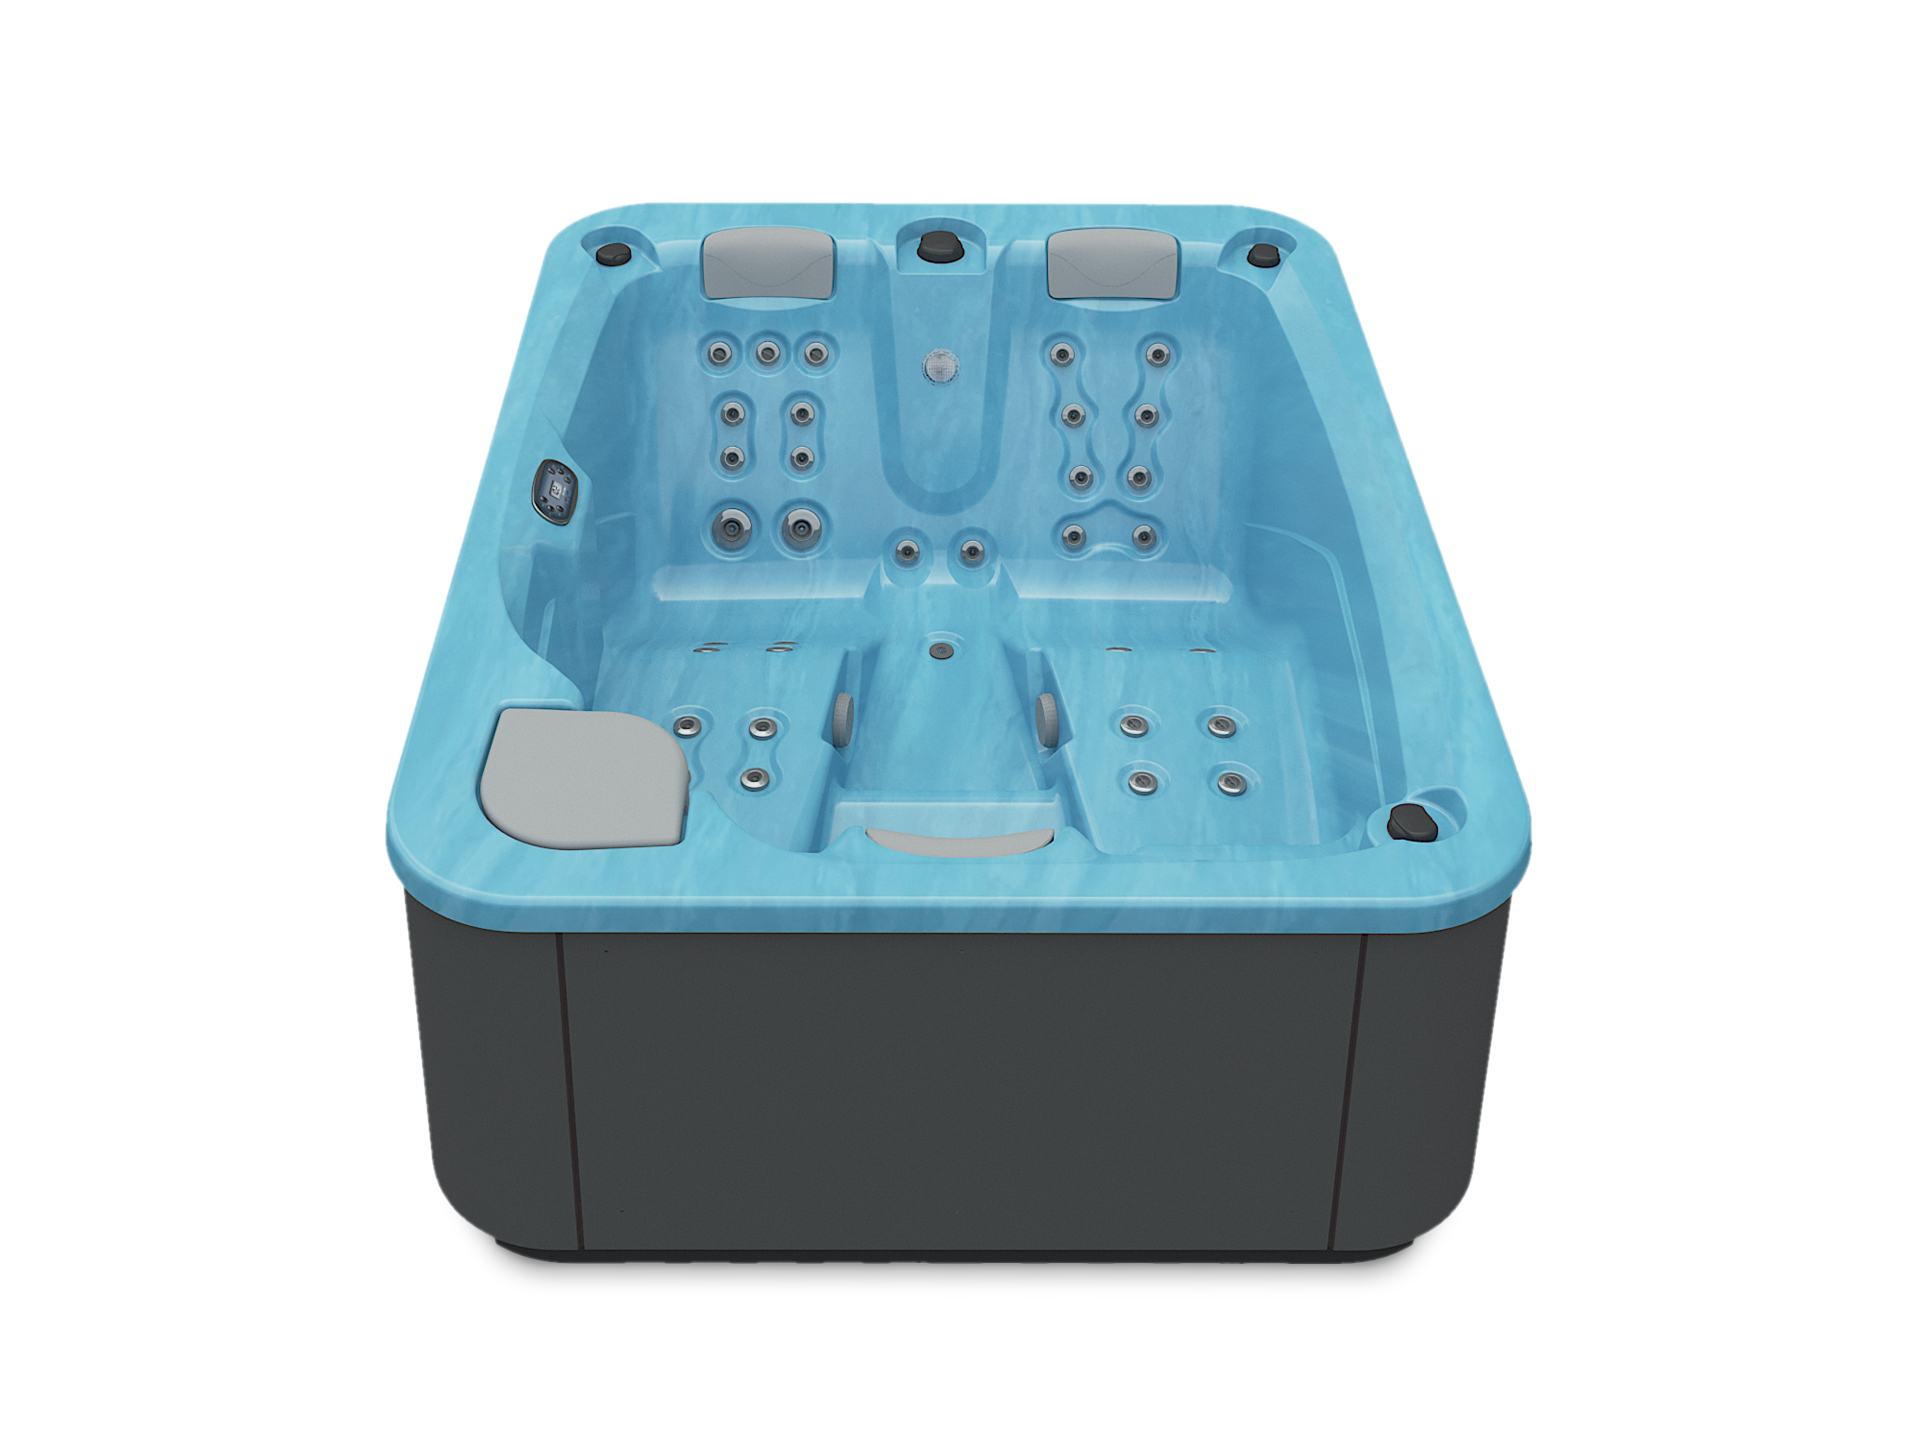 The Touch compact hot tub, a 4-person jacuzzi